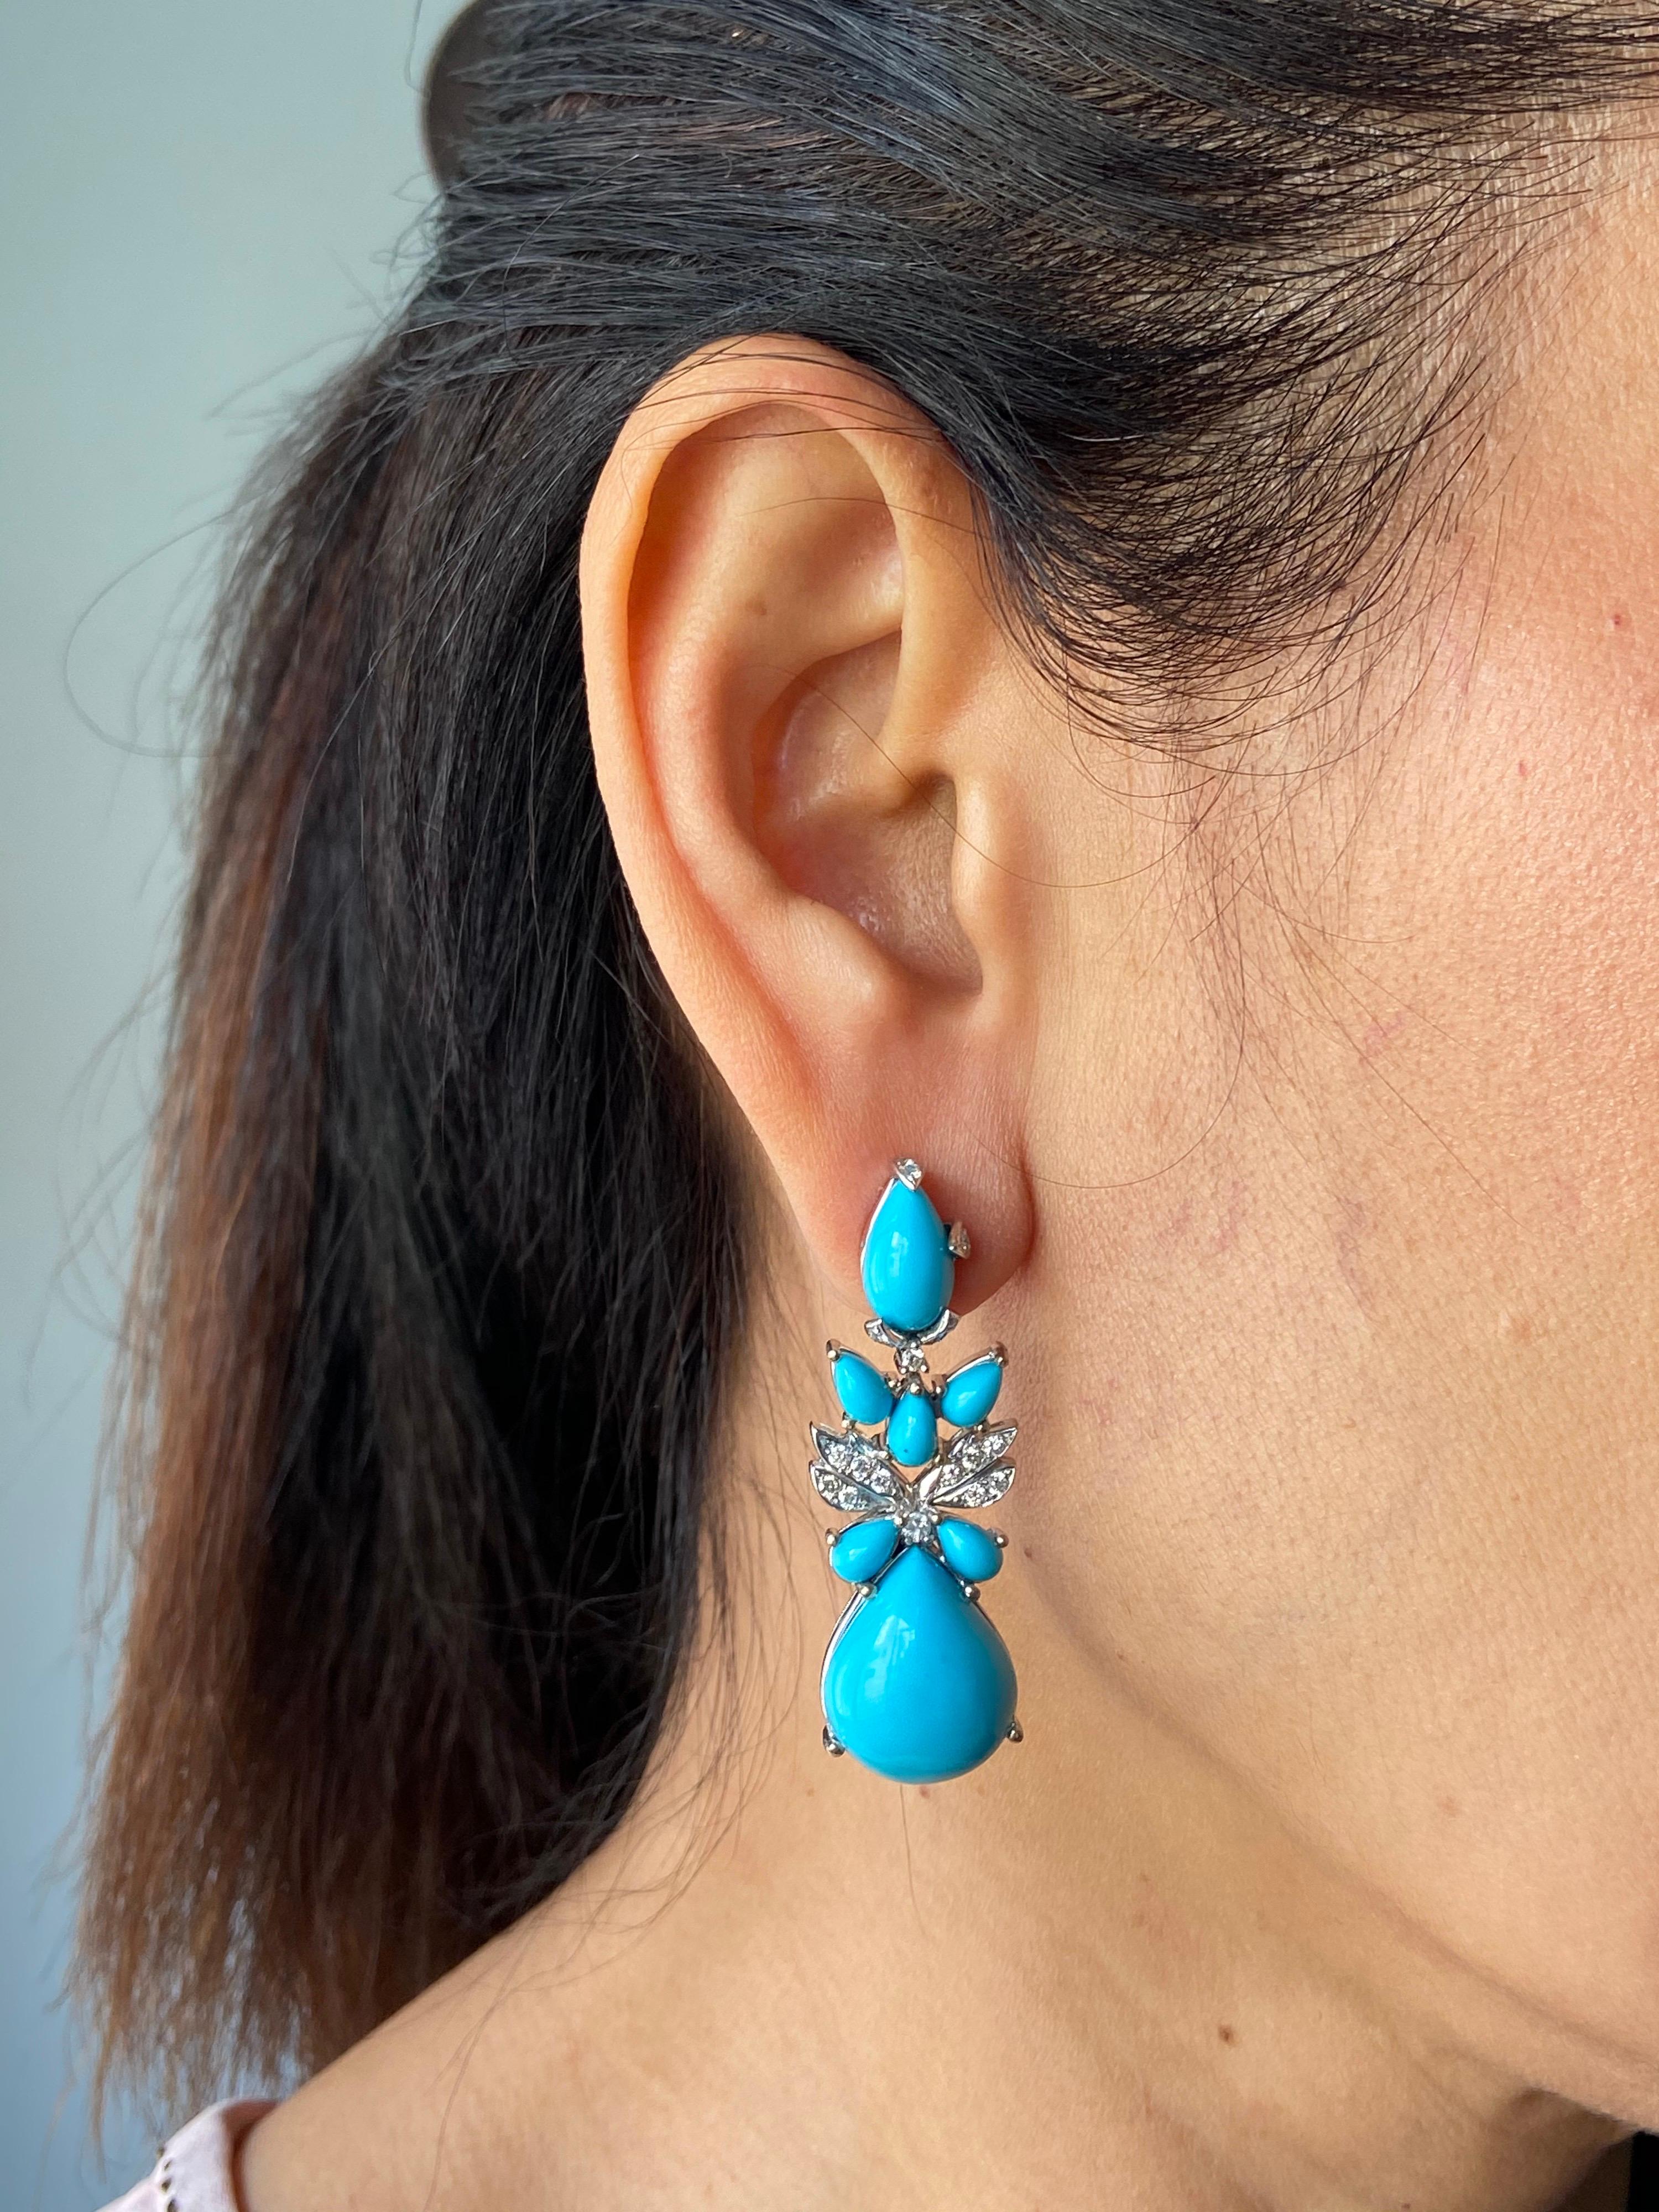 A beautiful pair of pear shape cabochon natural Turquoise and Diamond earrings, set in 18K White Gold. A push-pull backing is used for this pair.

Stone Details:
Turquoise: 24.39 carat
Diamond: 0.36 carat

18K Gold: 17.35 grams